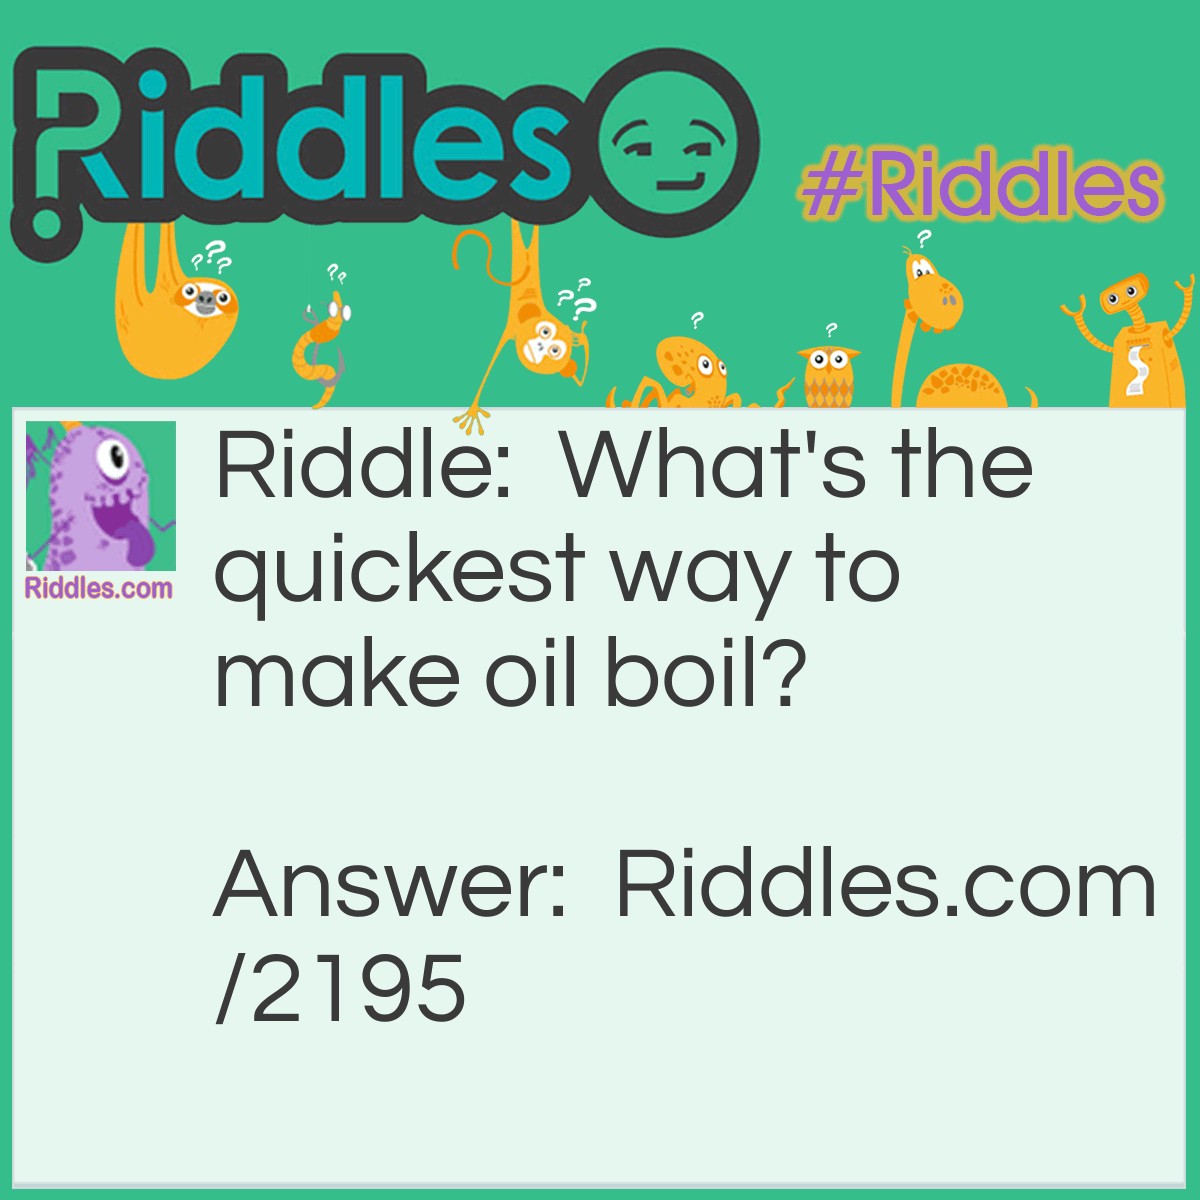 Riddle: What's the quickest way to make oil boil? Answer: Add the letter B.